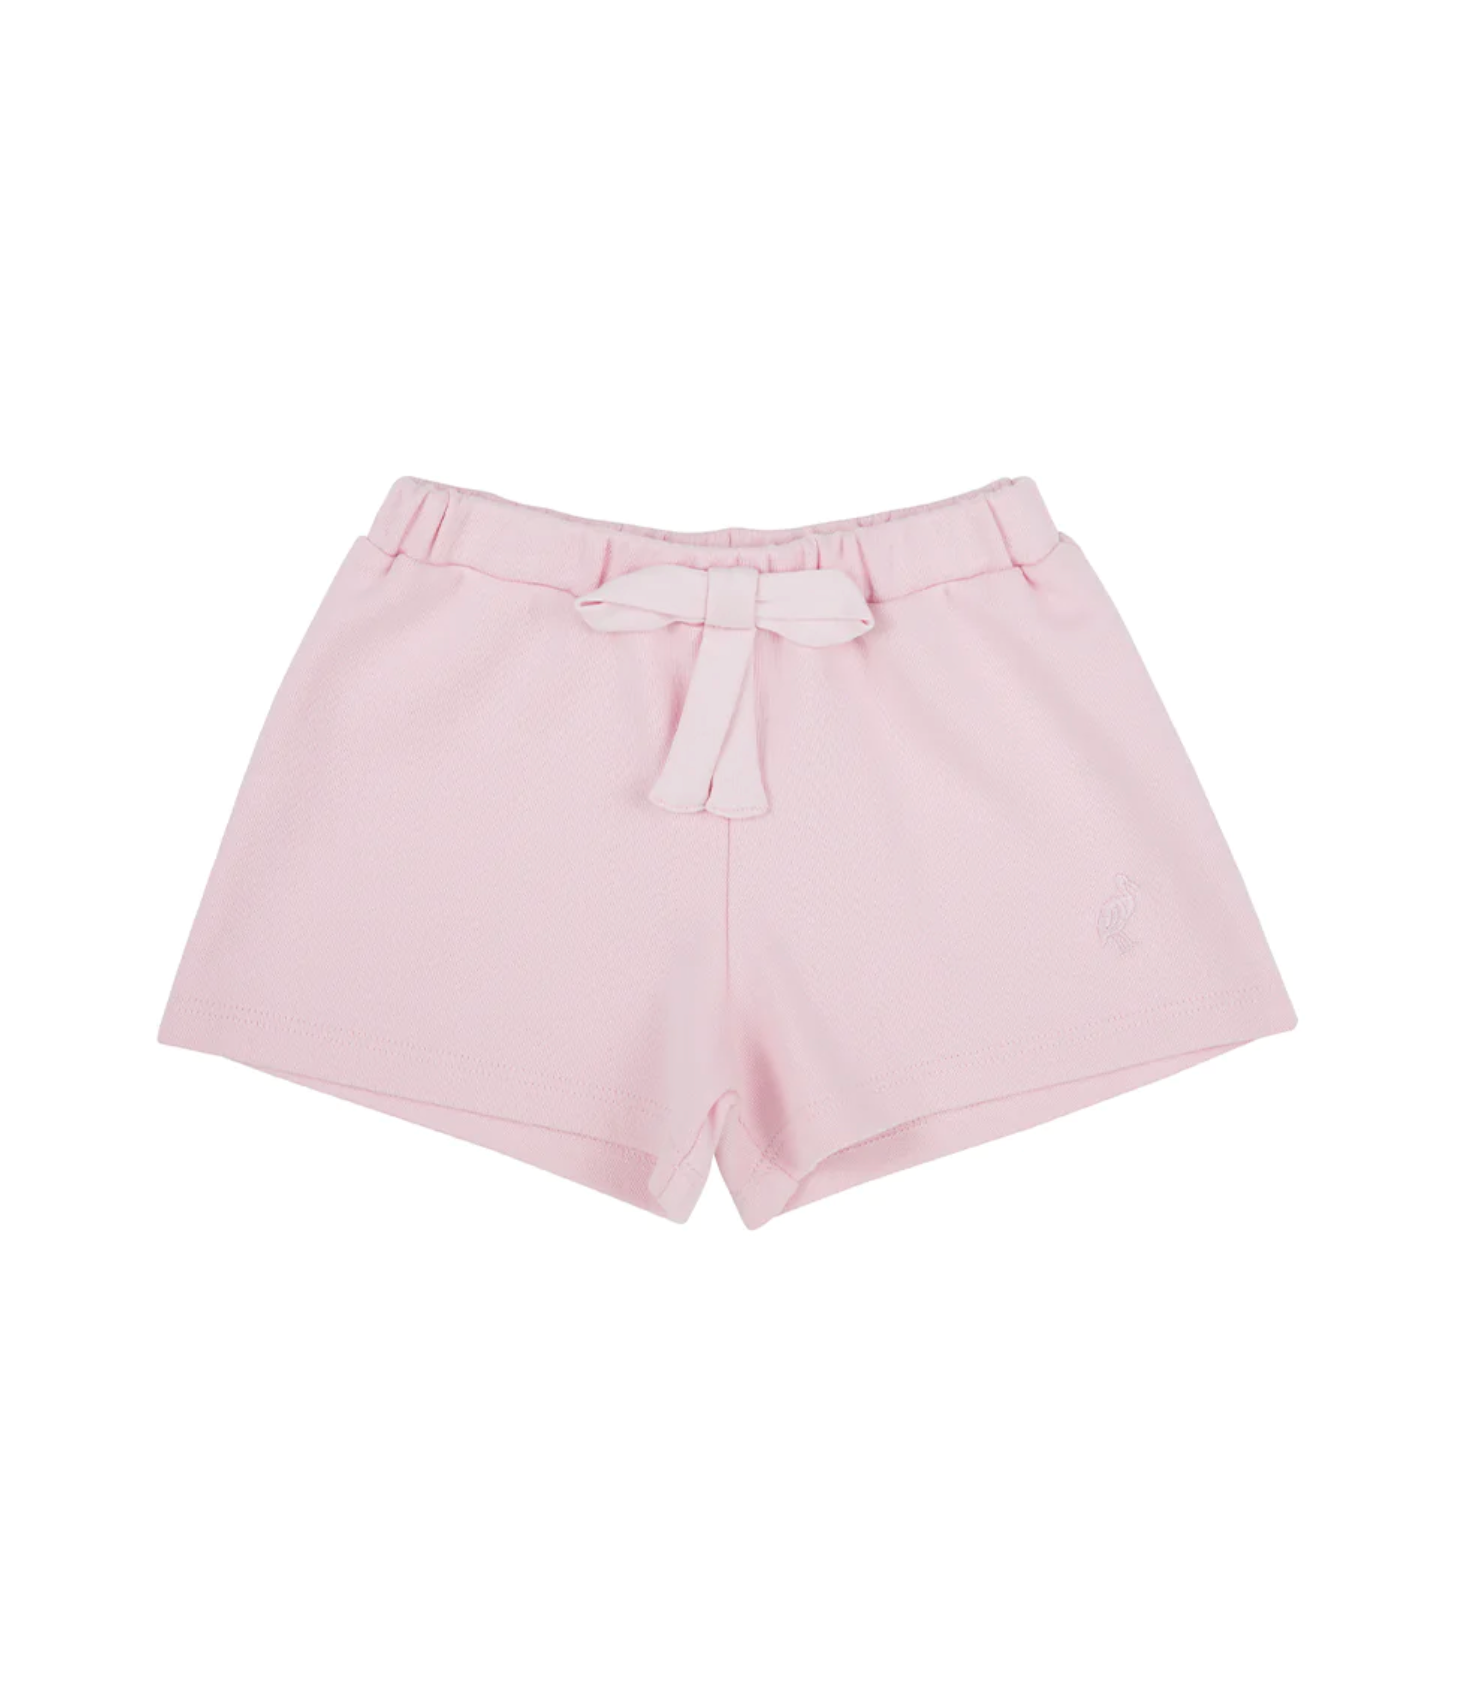 TBBC: Shipley Shorts - Palm Beach Pink With Palm Beach Pink Bow & Stork